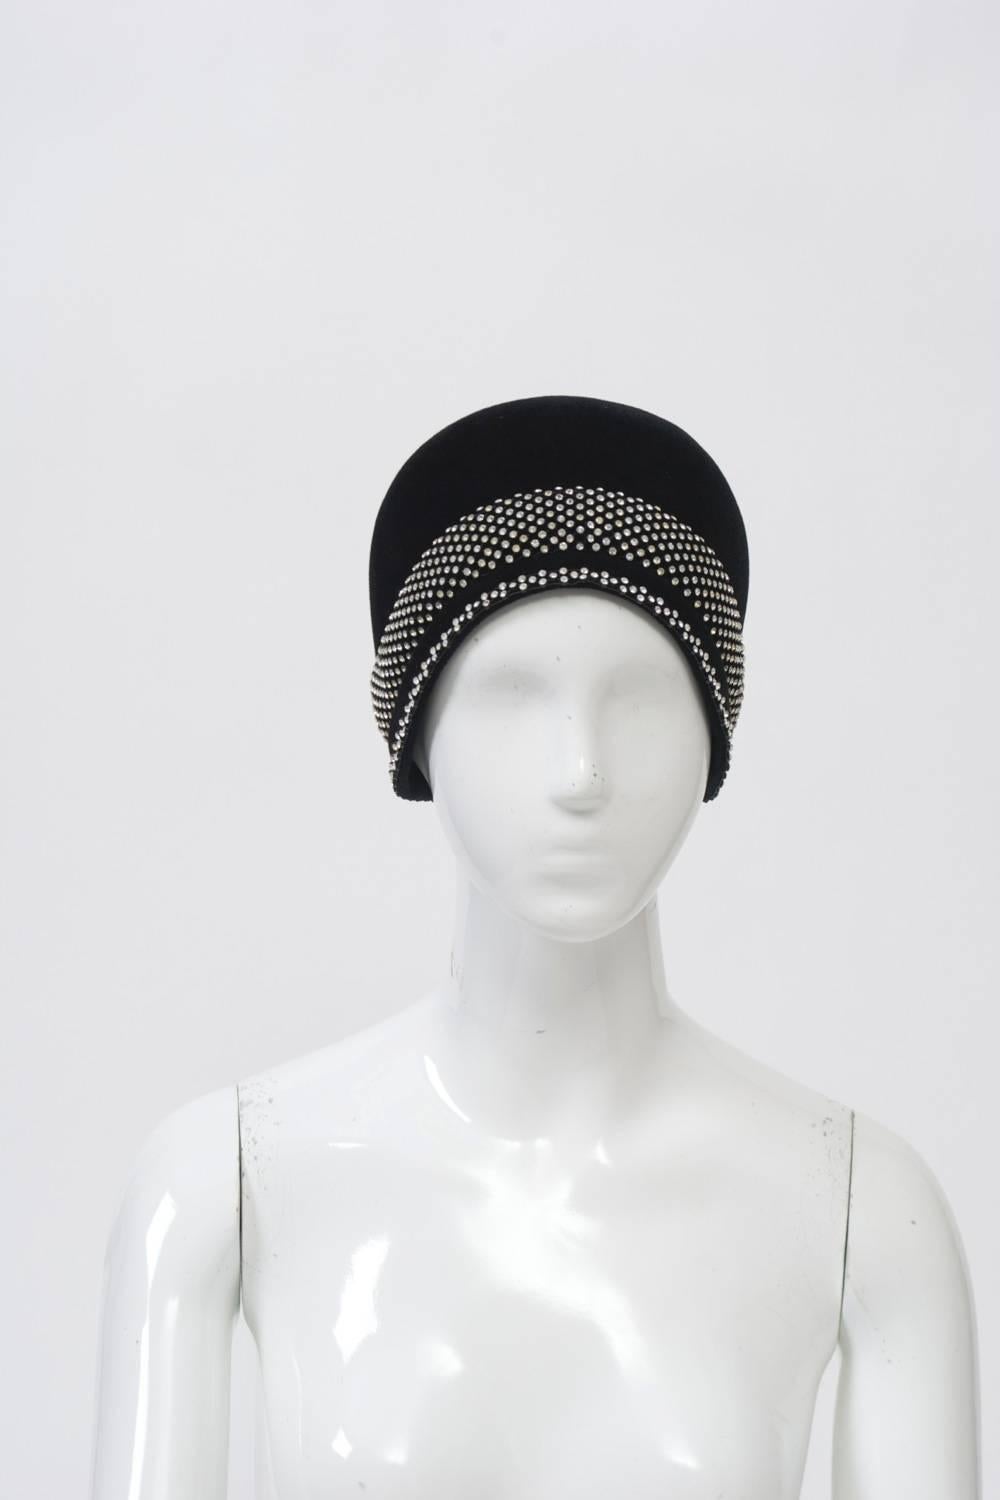 Cloche hat in luxe black felt with wide band of rhinestones around crown and narrow row around rim. Nicely shaped. Unlined and unlabeled. Approximate size S-M.